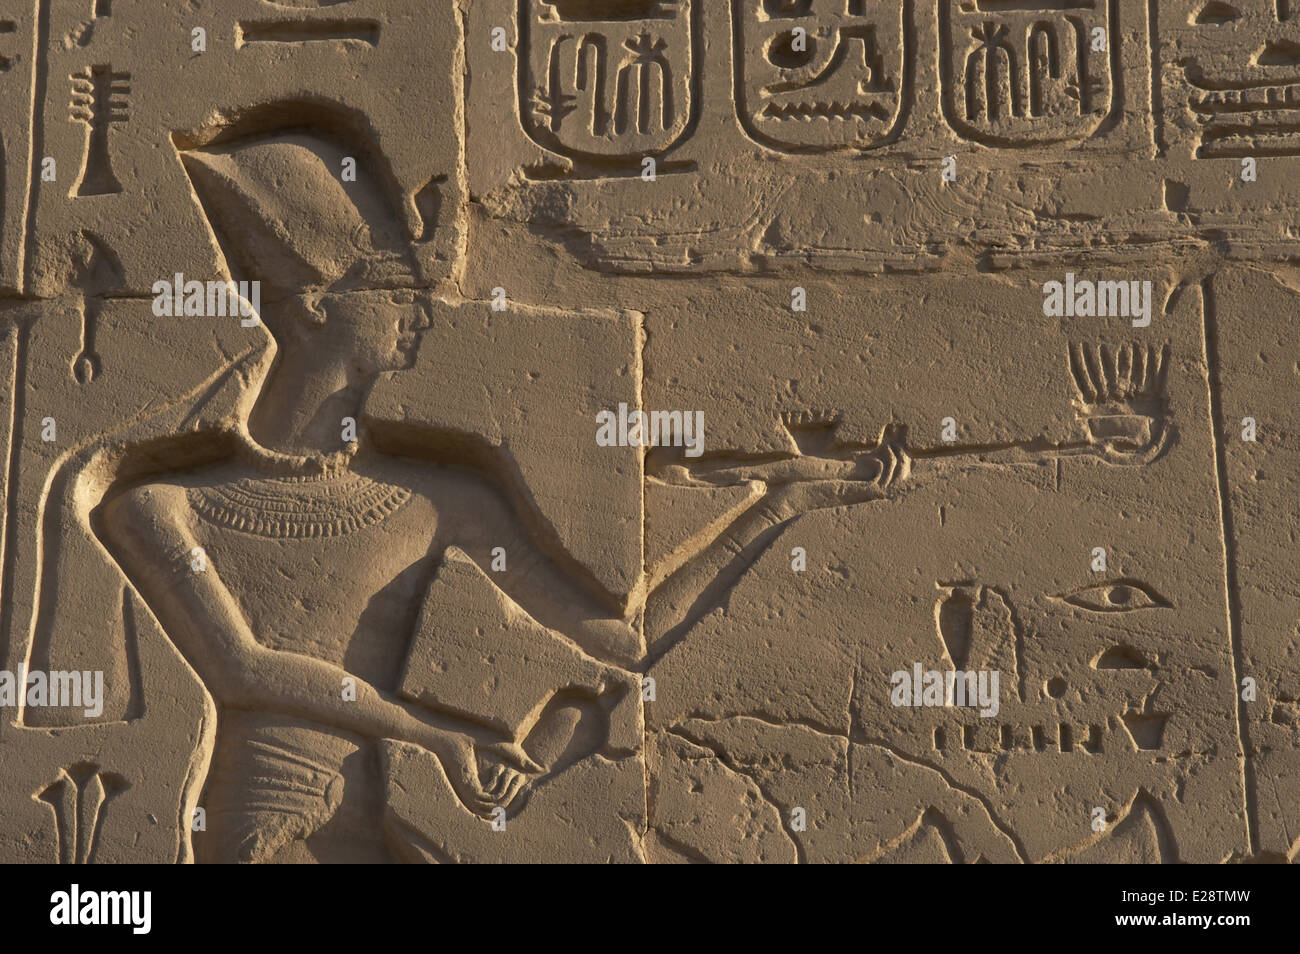 Egypt. The Karnak Temple Complex. Relief depicting the Pharaoh Ramesses II  making an offering with incense burner. Stock Photo